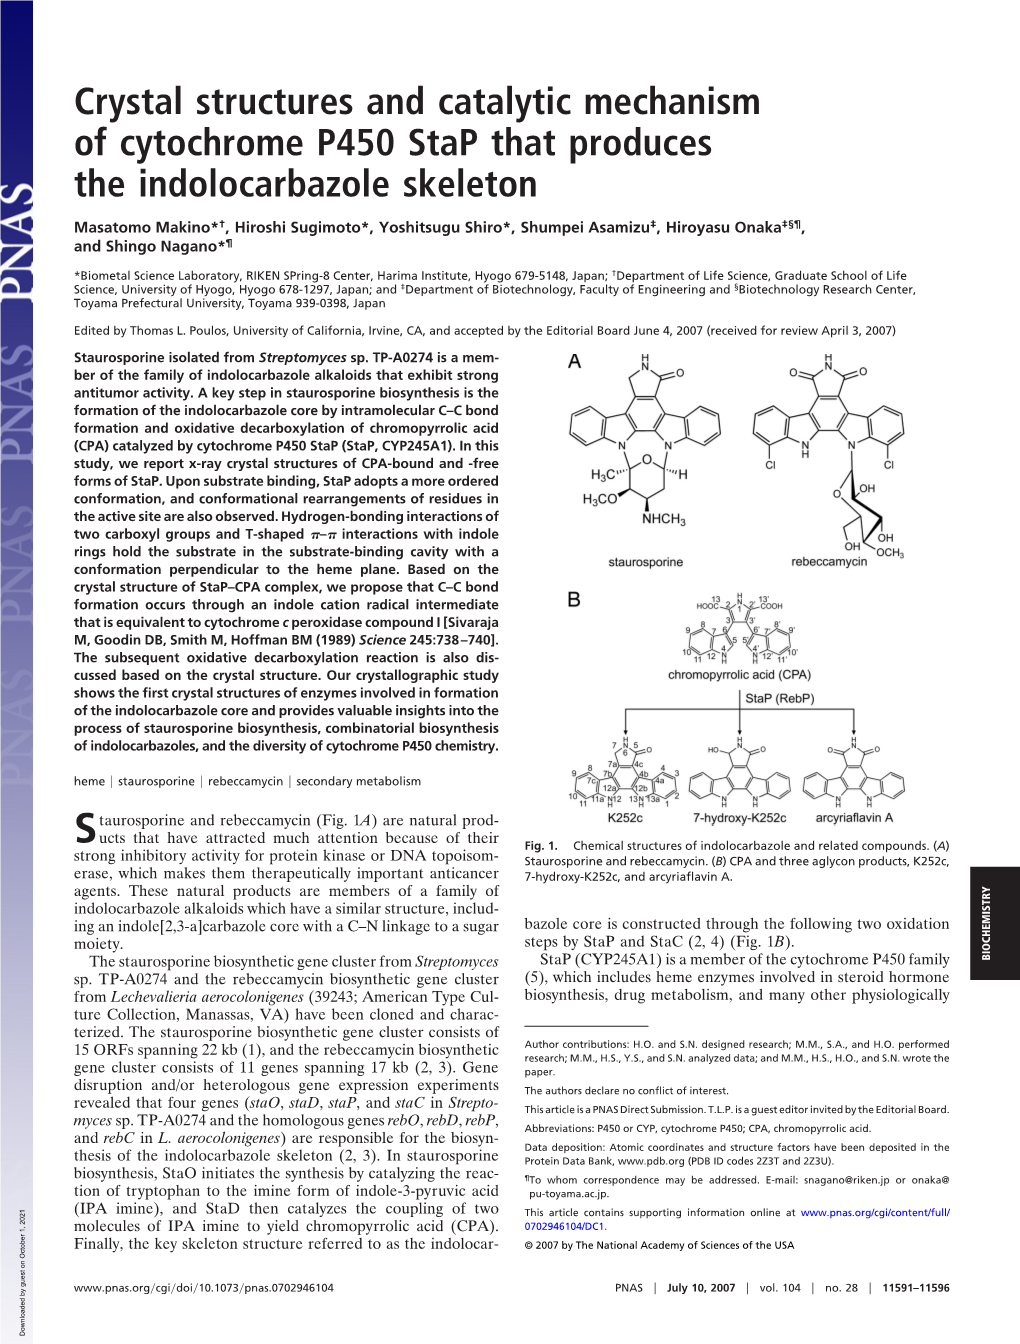 Crystal Structures and Catalytic Mechanism of Cytochrome P450 Stap That Produces the Indolocarbazole Skeleton